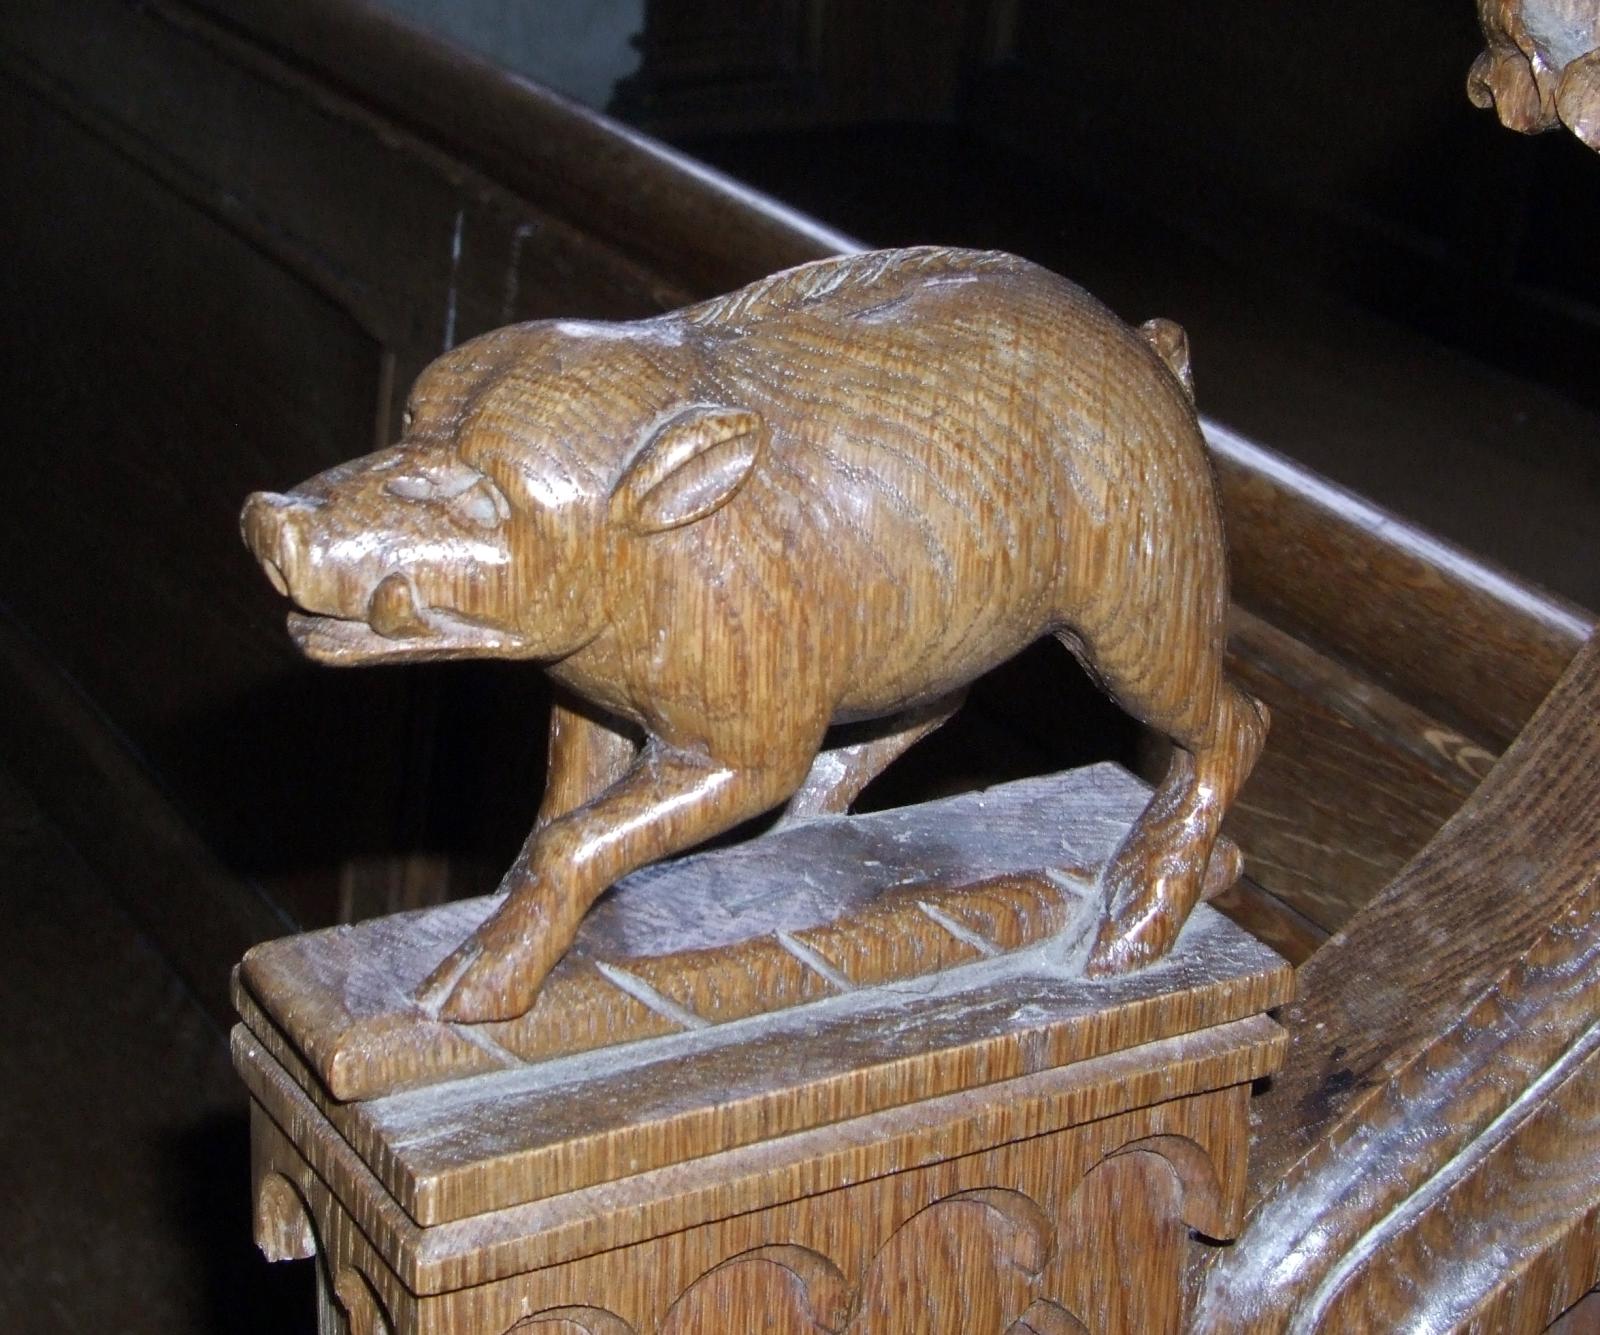 the sculpture of a pig is made of wood